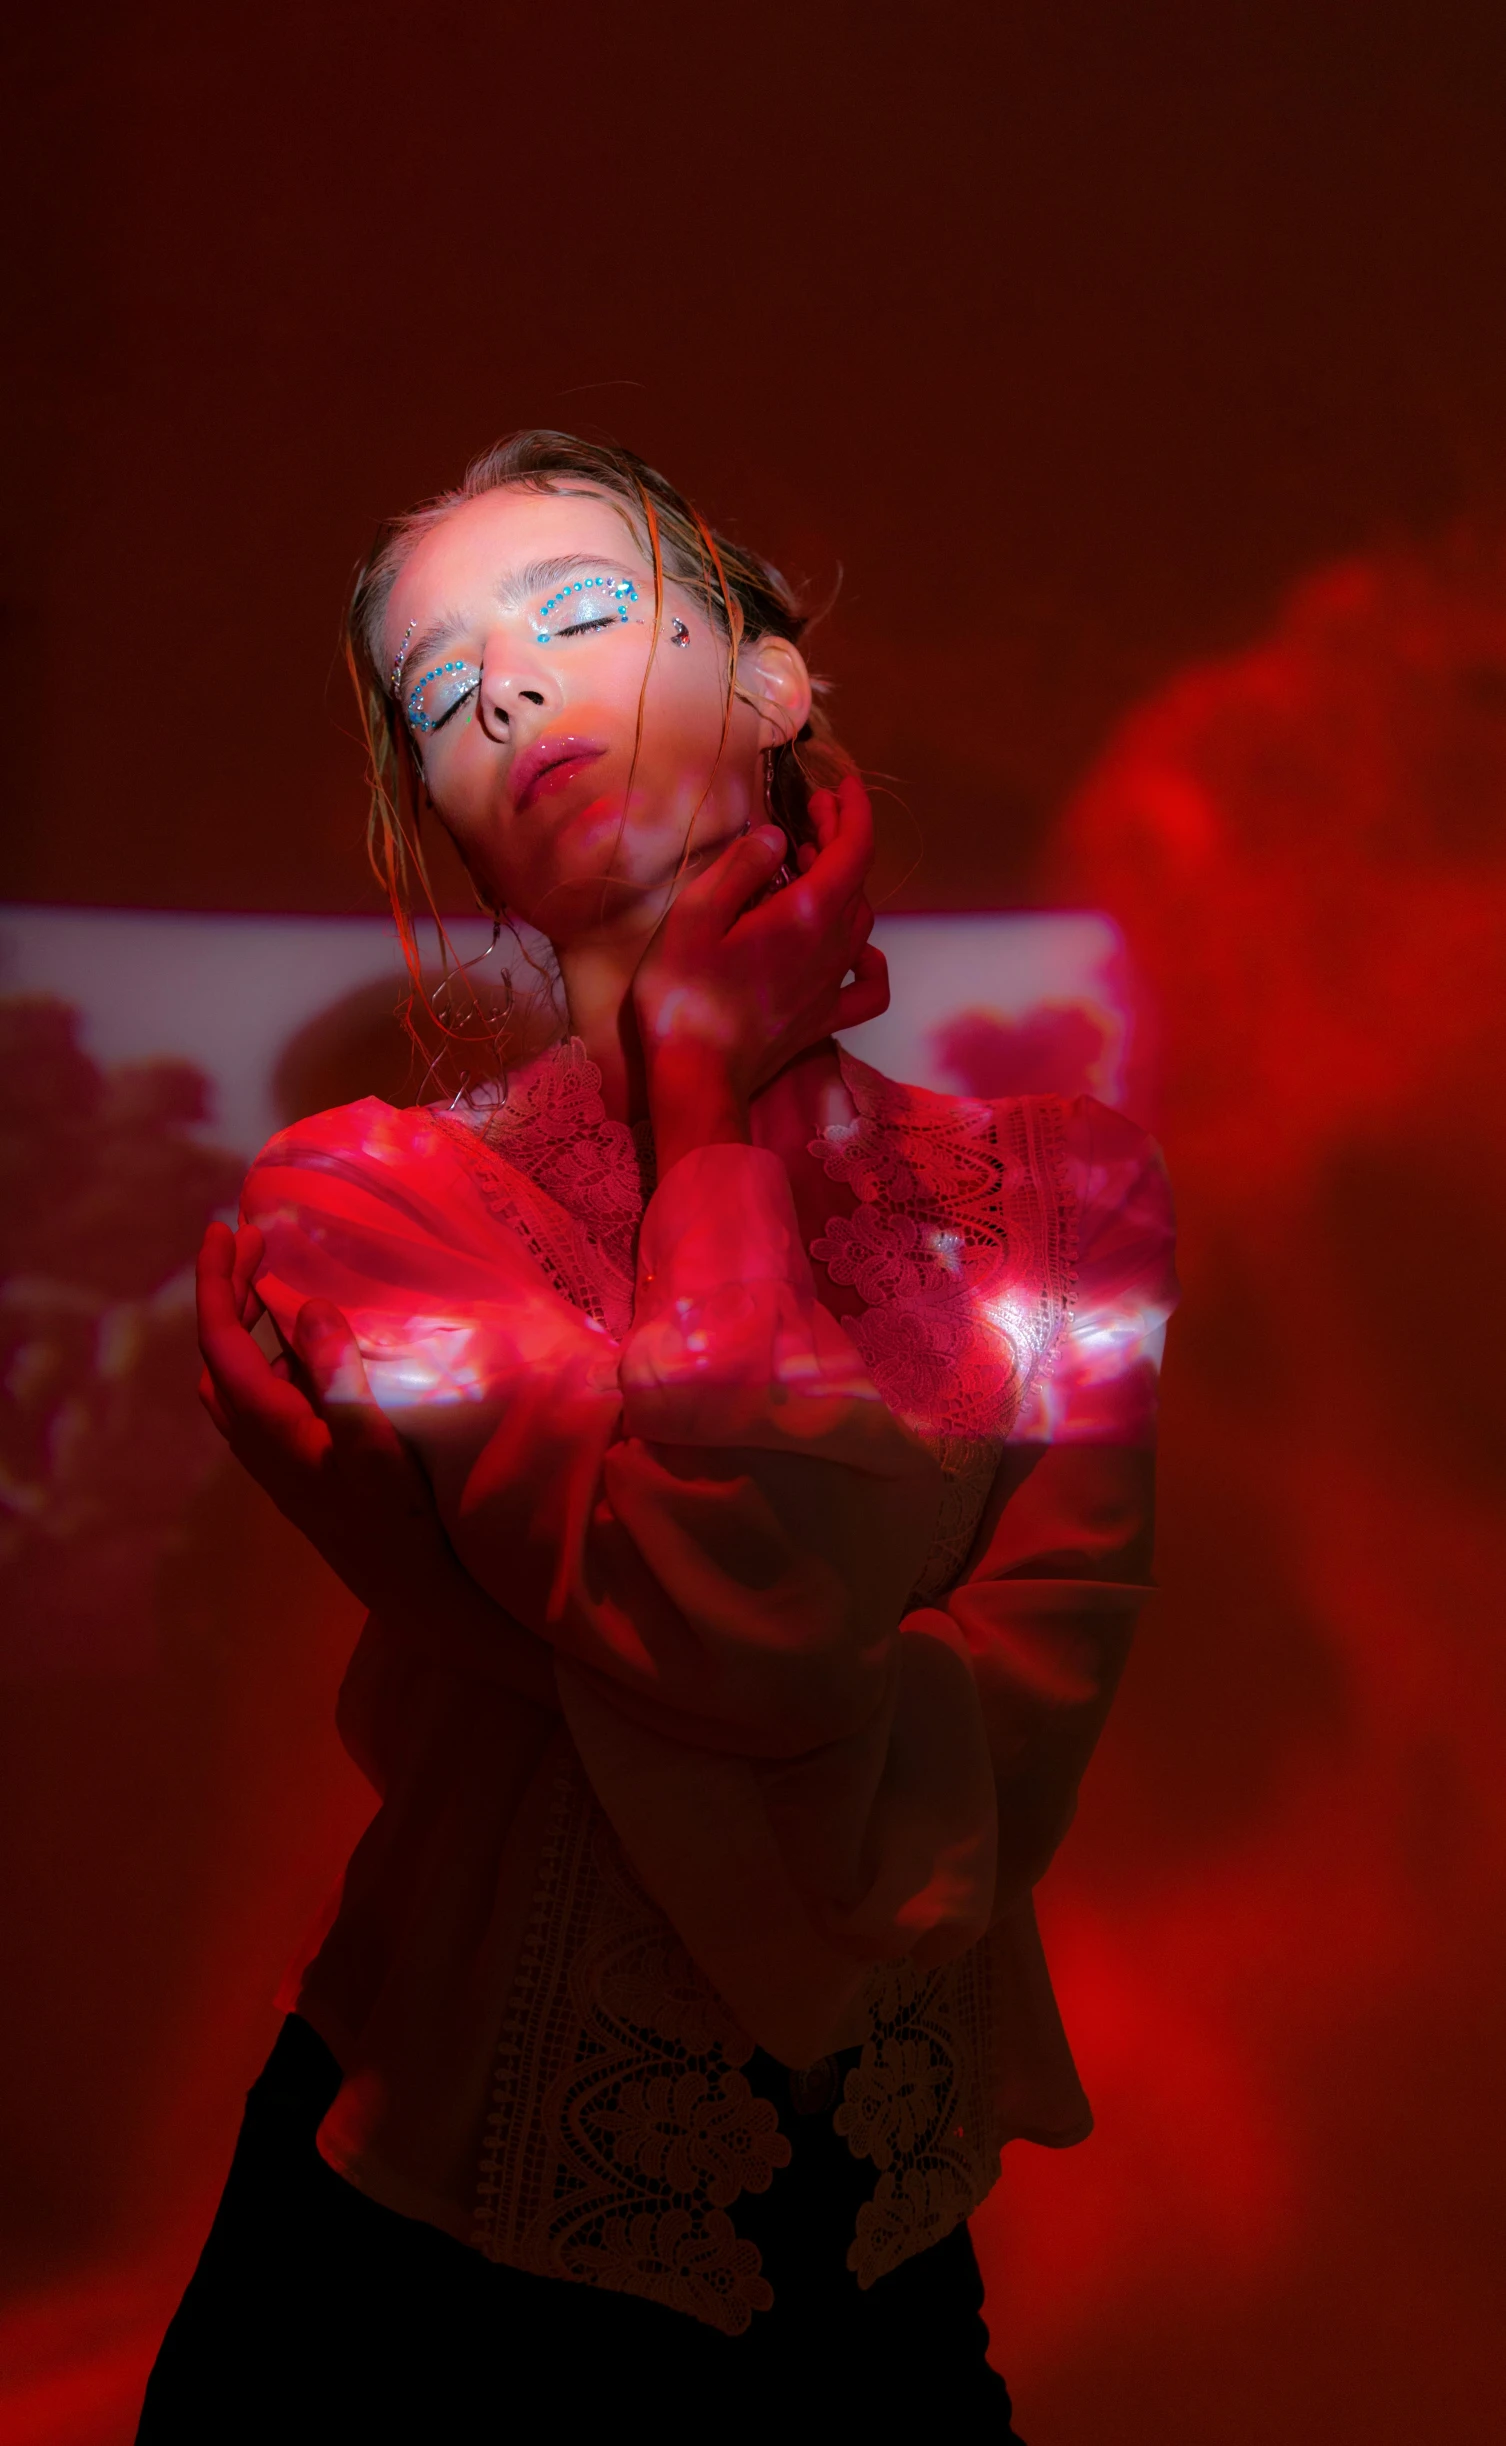 a woman standing in front of a red light, an album cover, pexels, holography, red cloud light, showstudio, model posing, joel fletcher